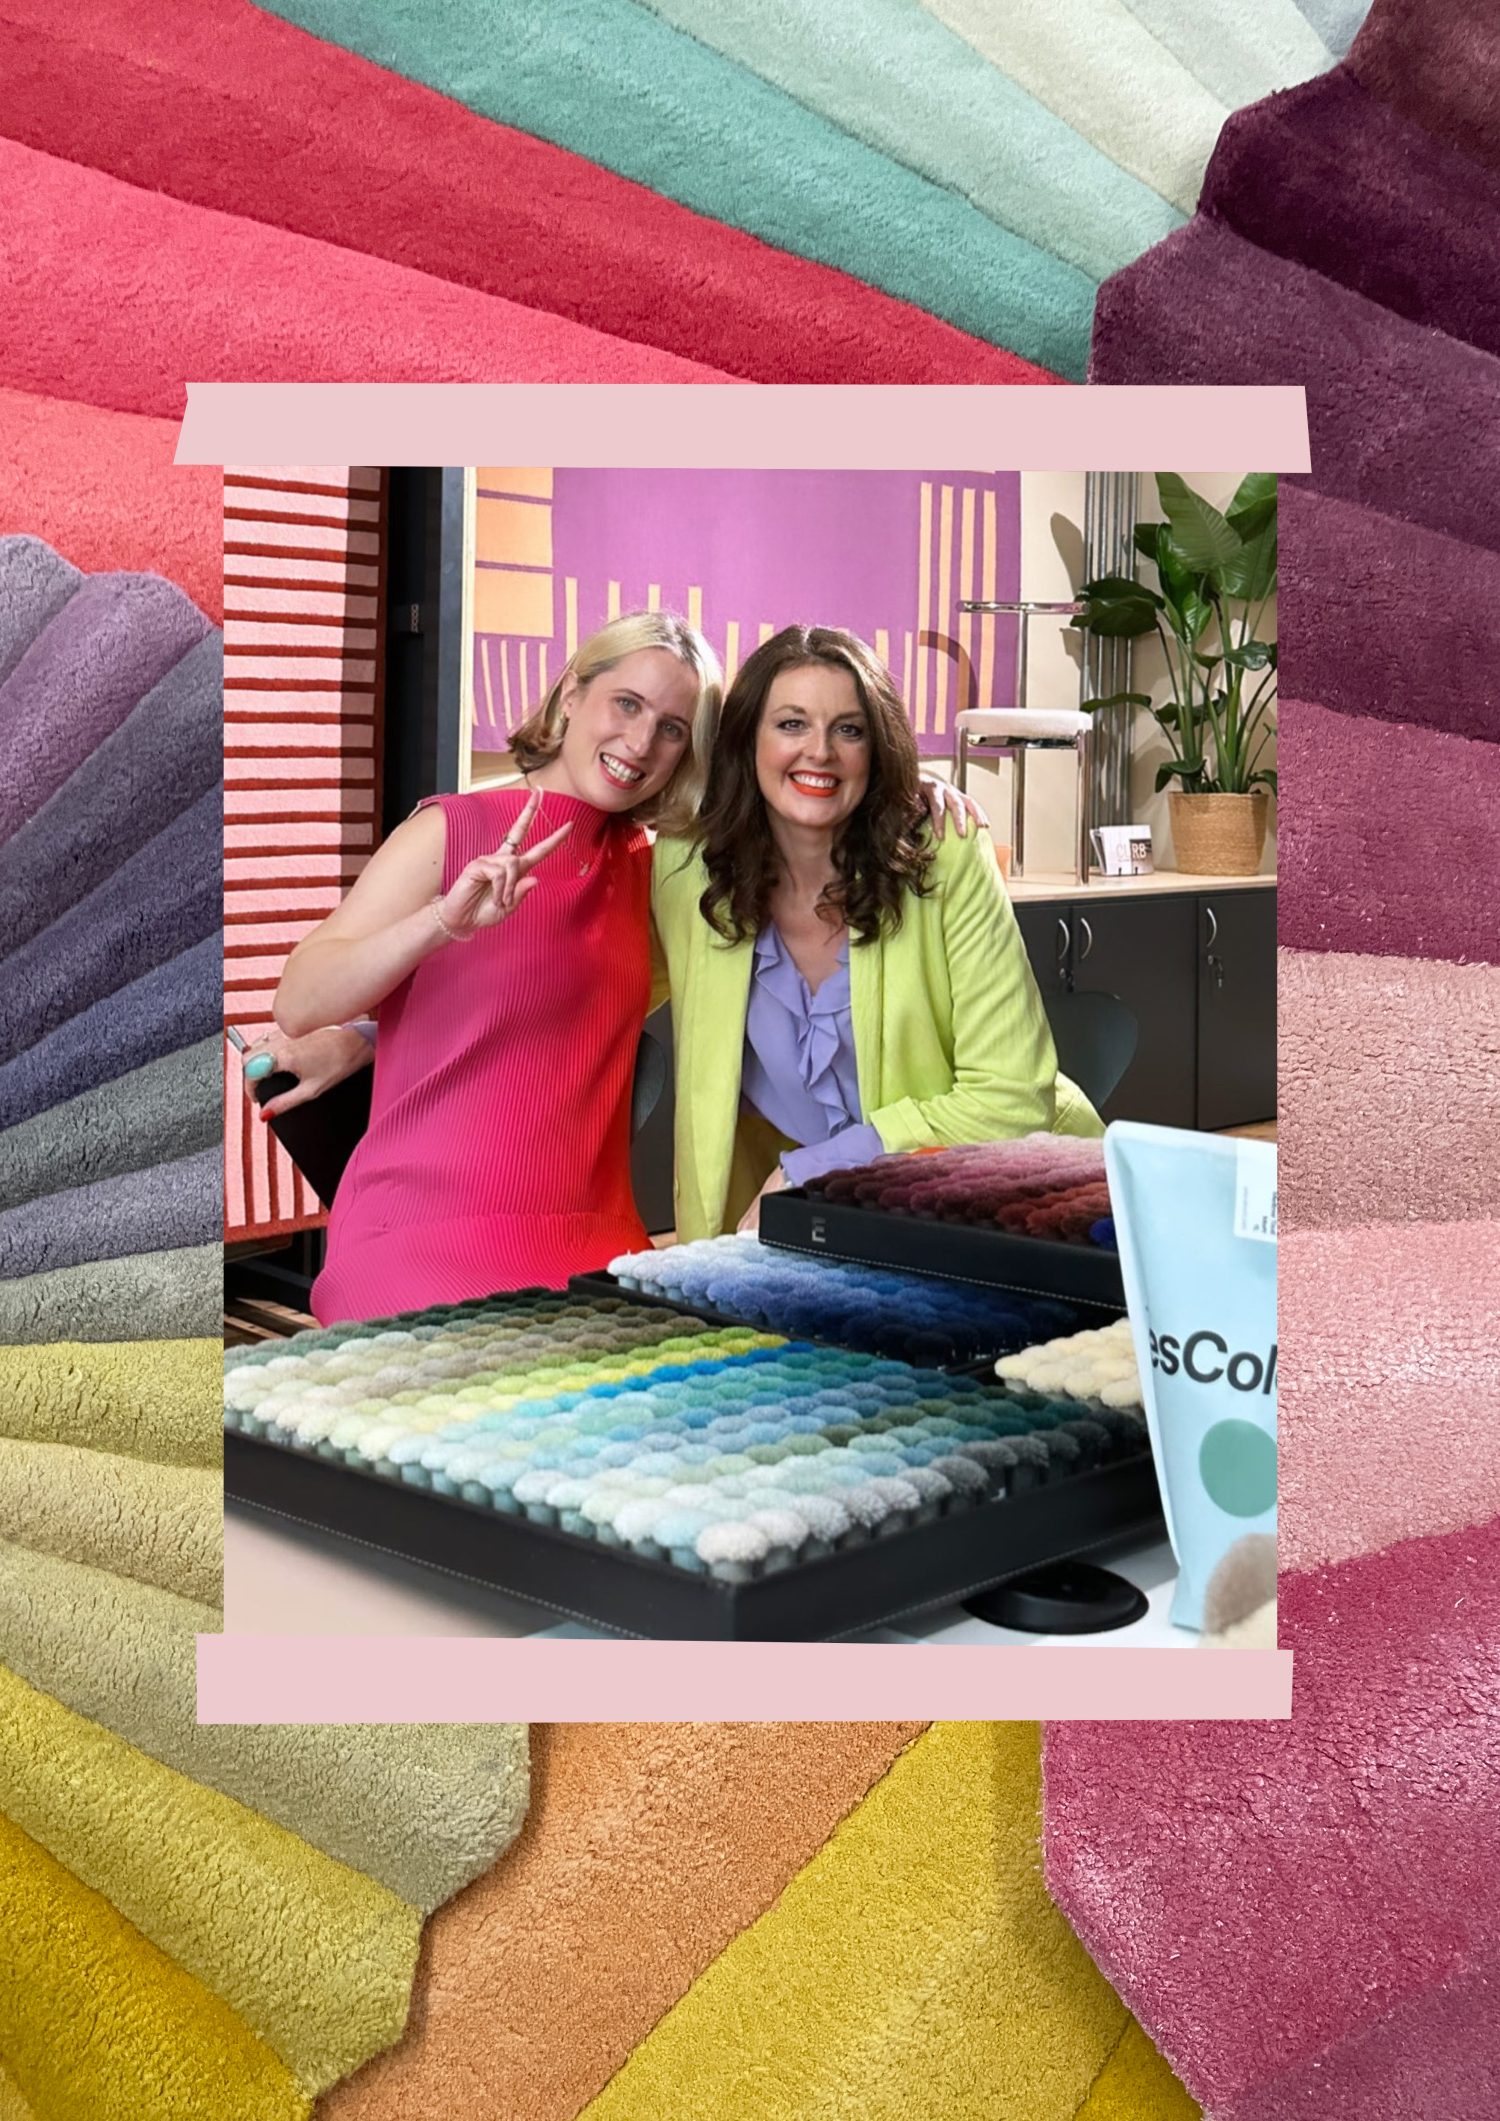 Designer Kitty Joseph and YesColours founder Emma Bestley at our Colour Stories workshop.